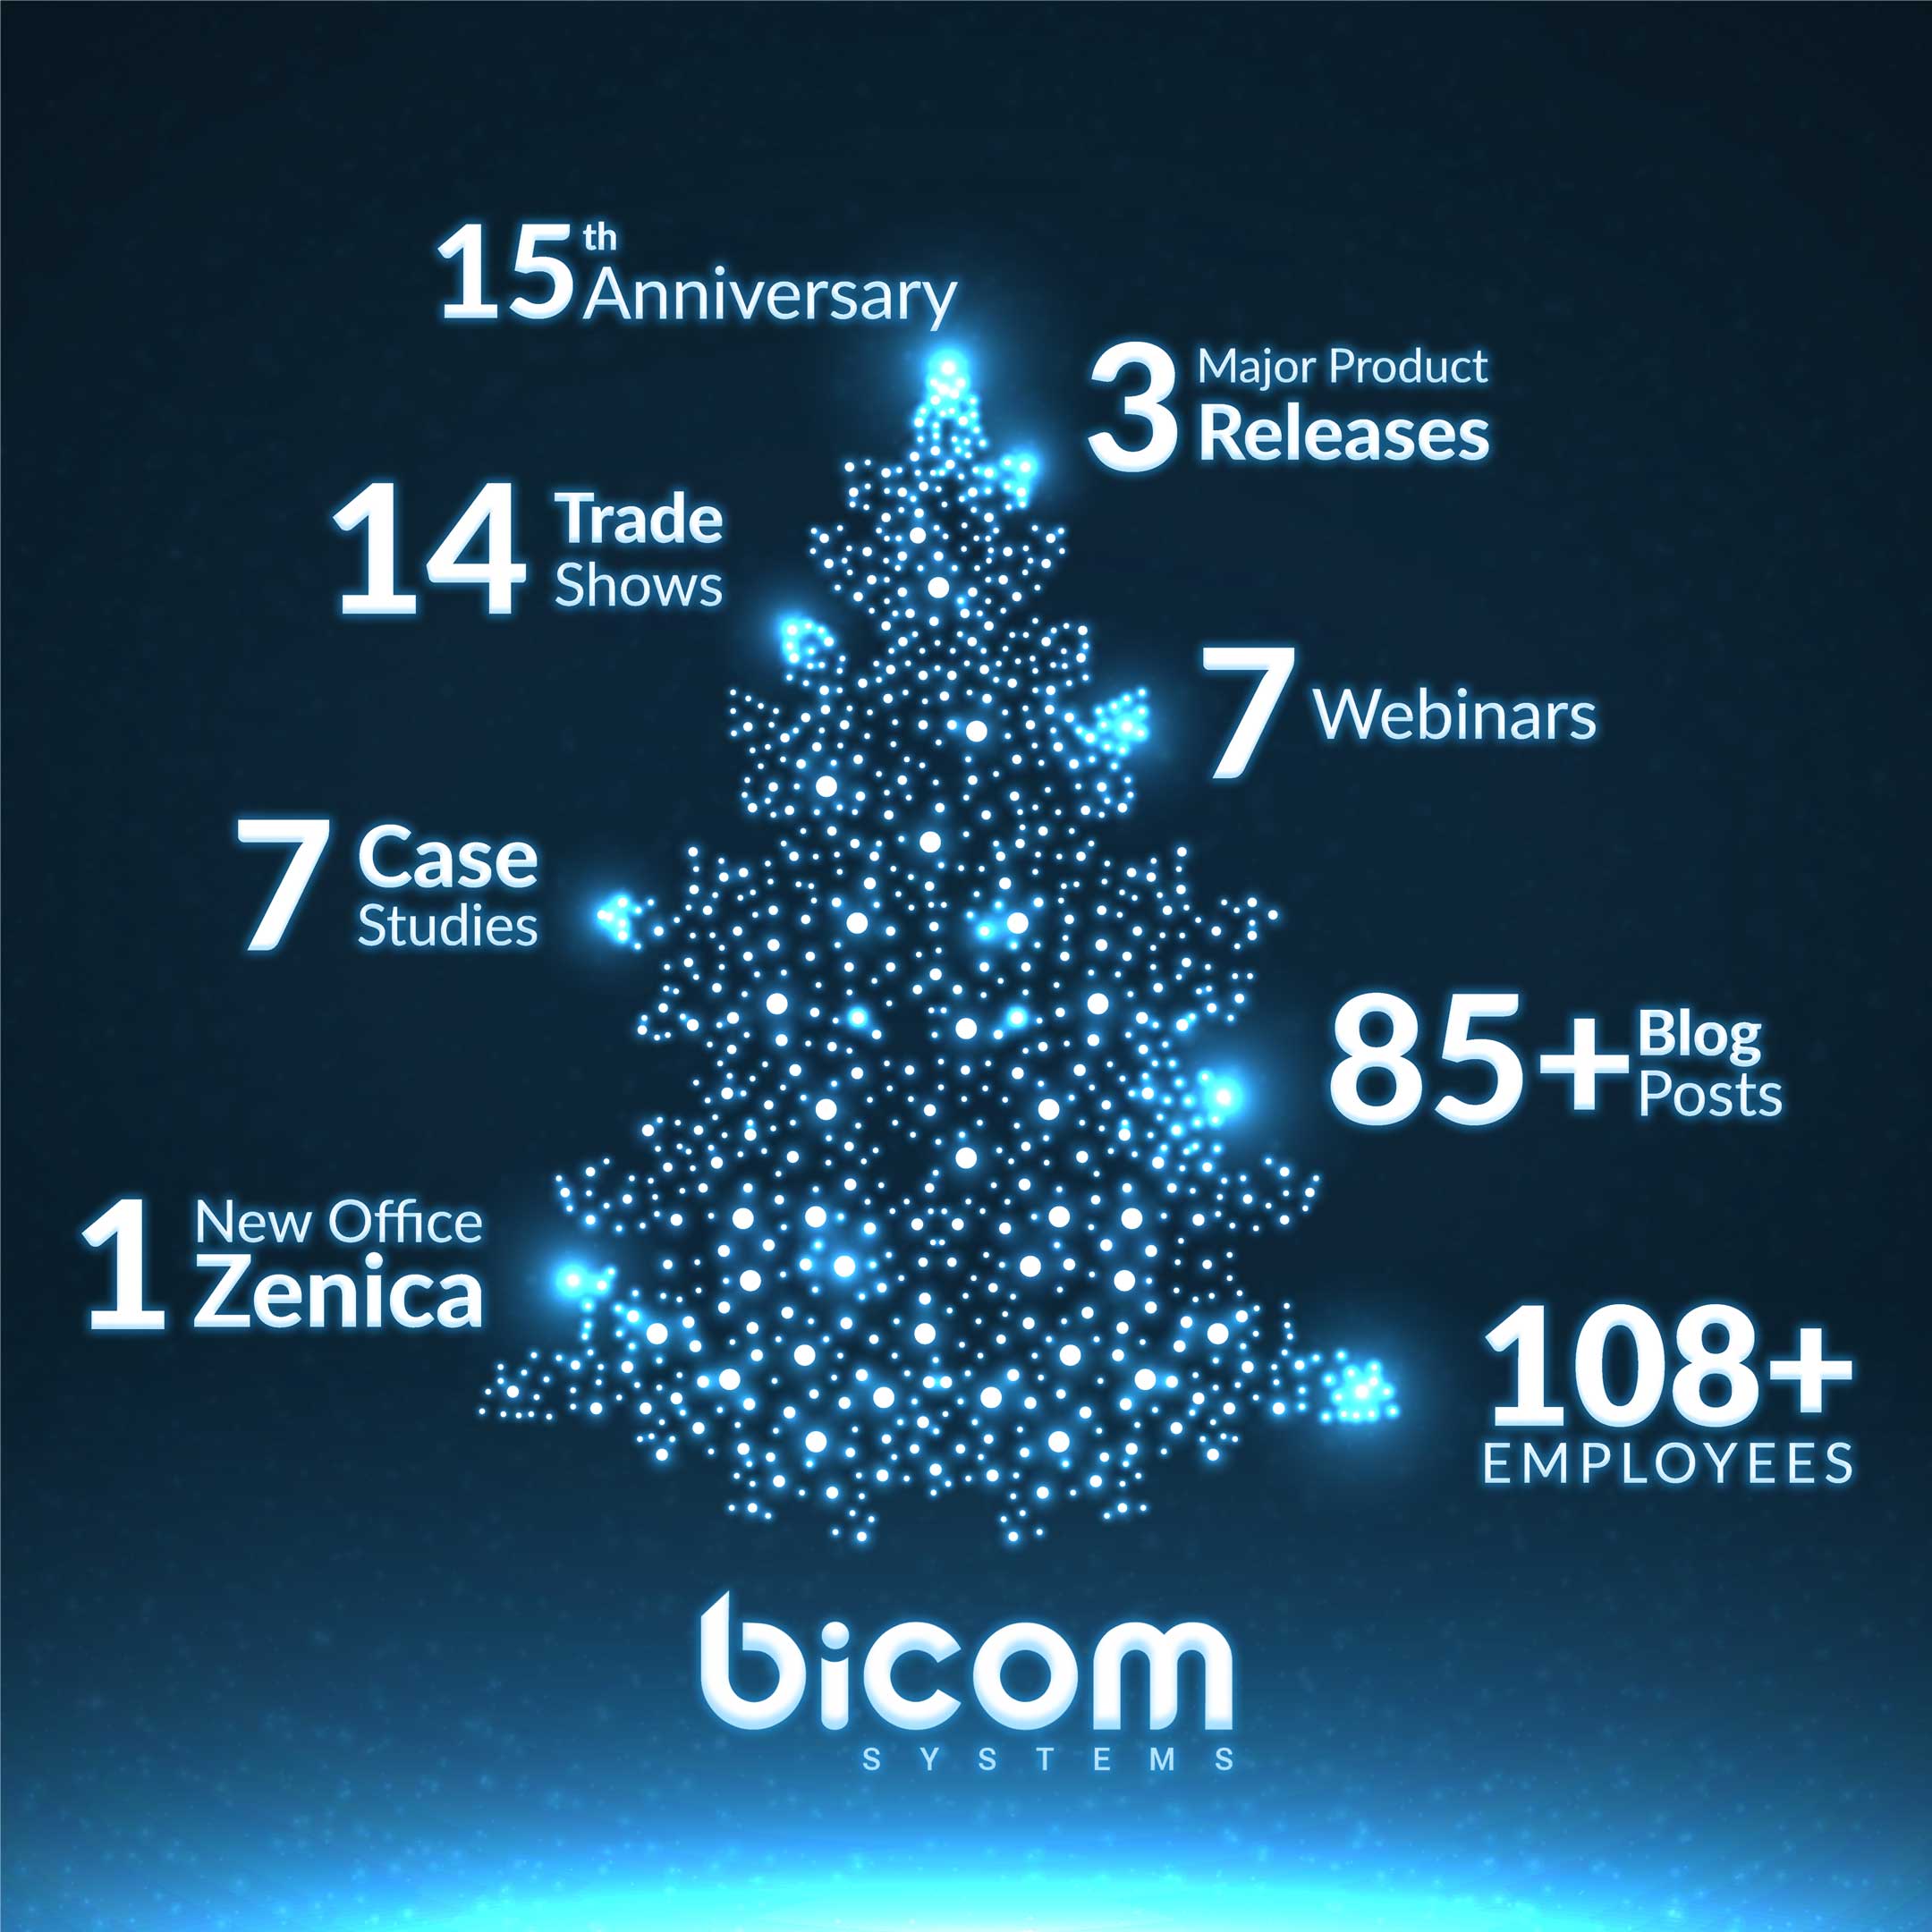 A year in review for telecommunications company